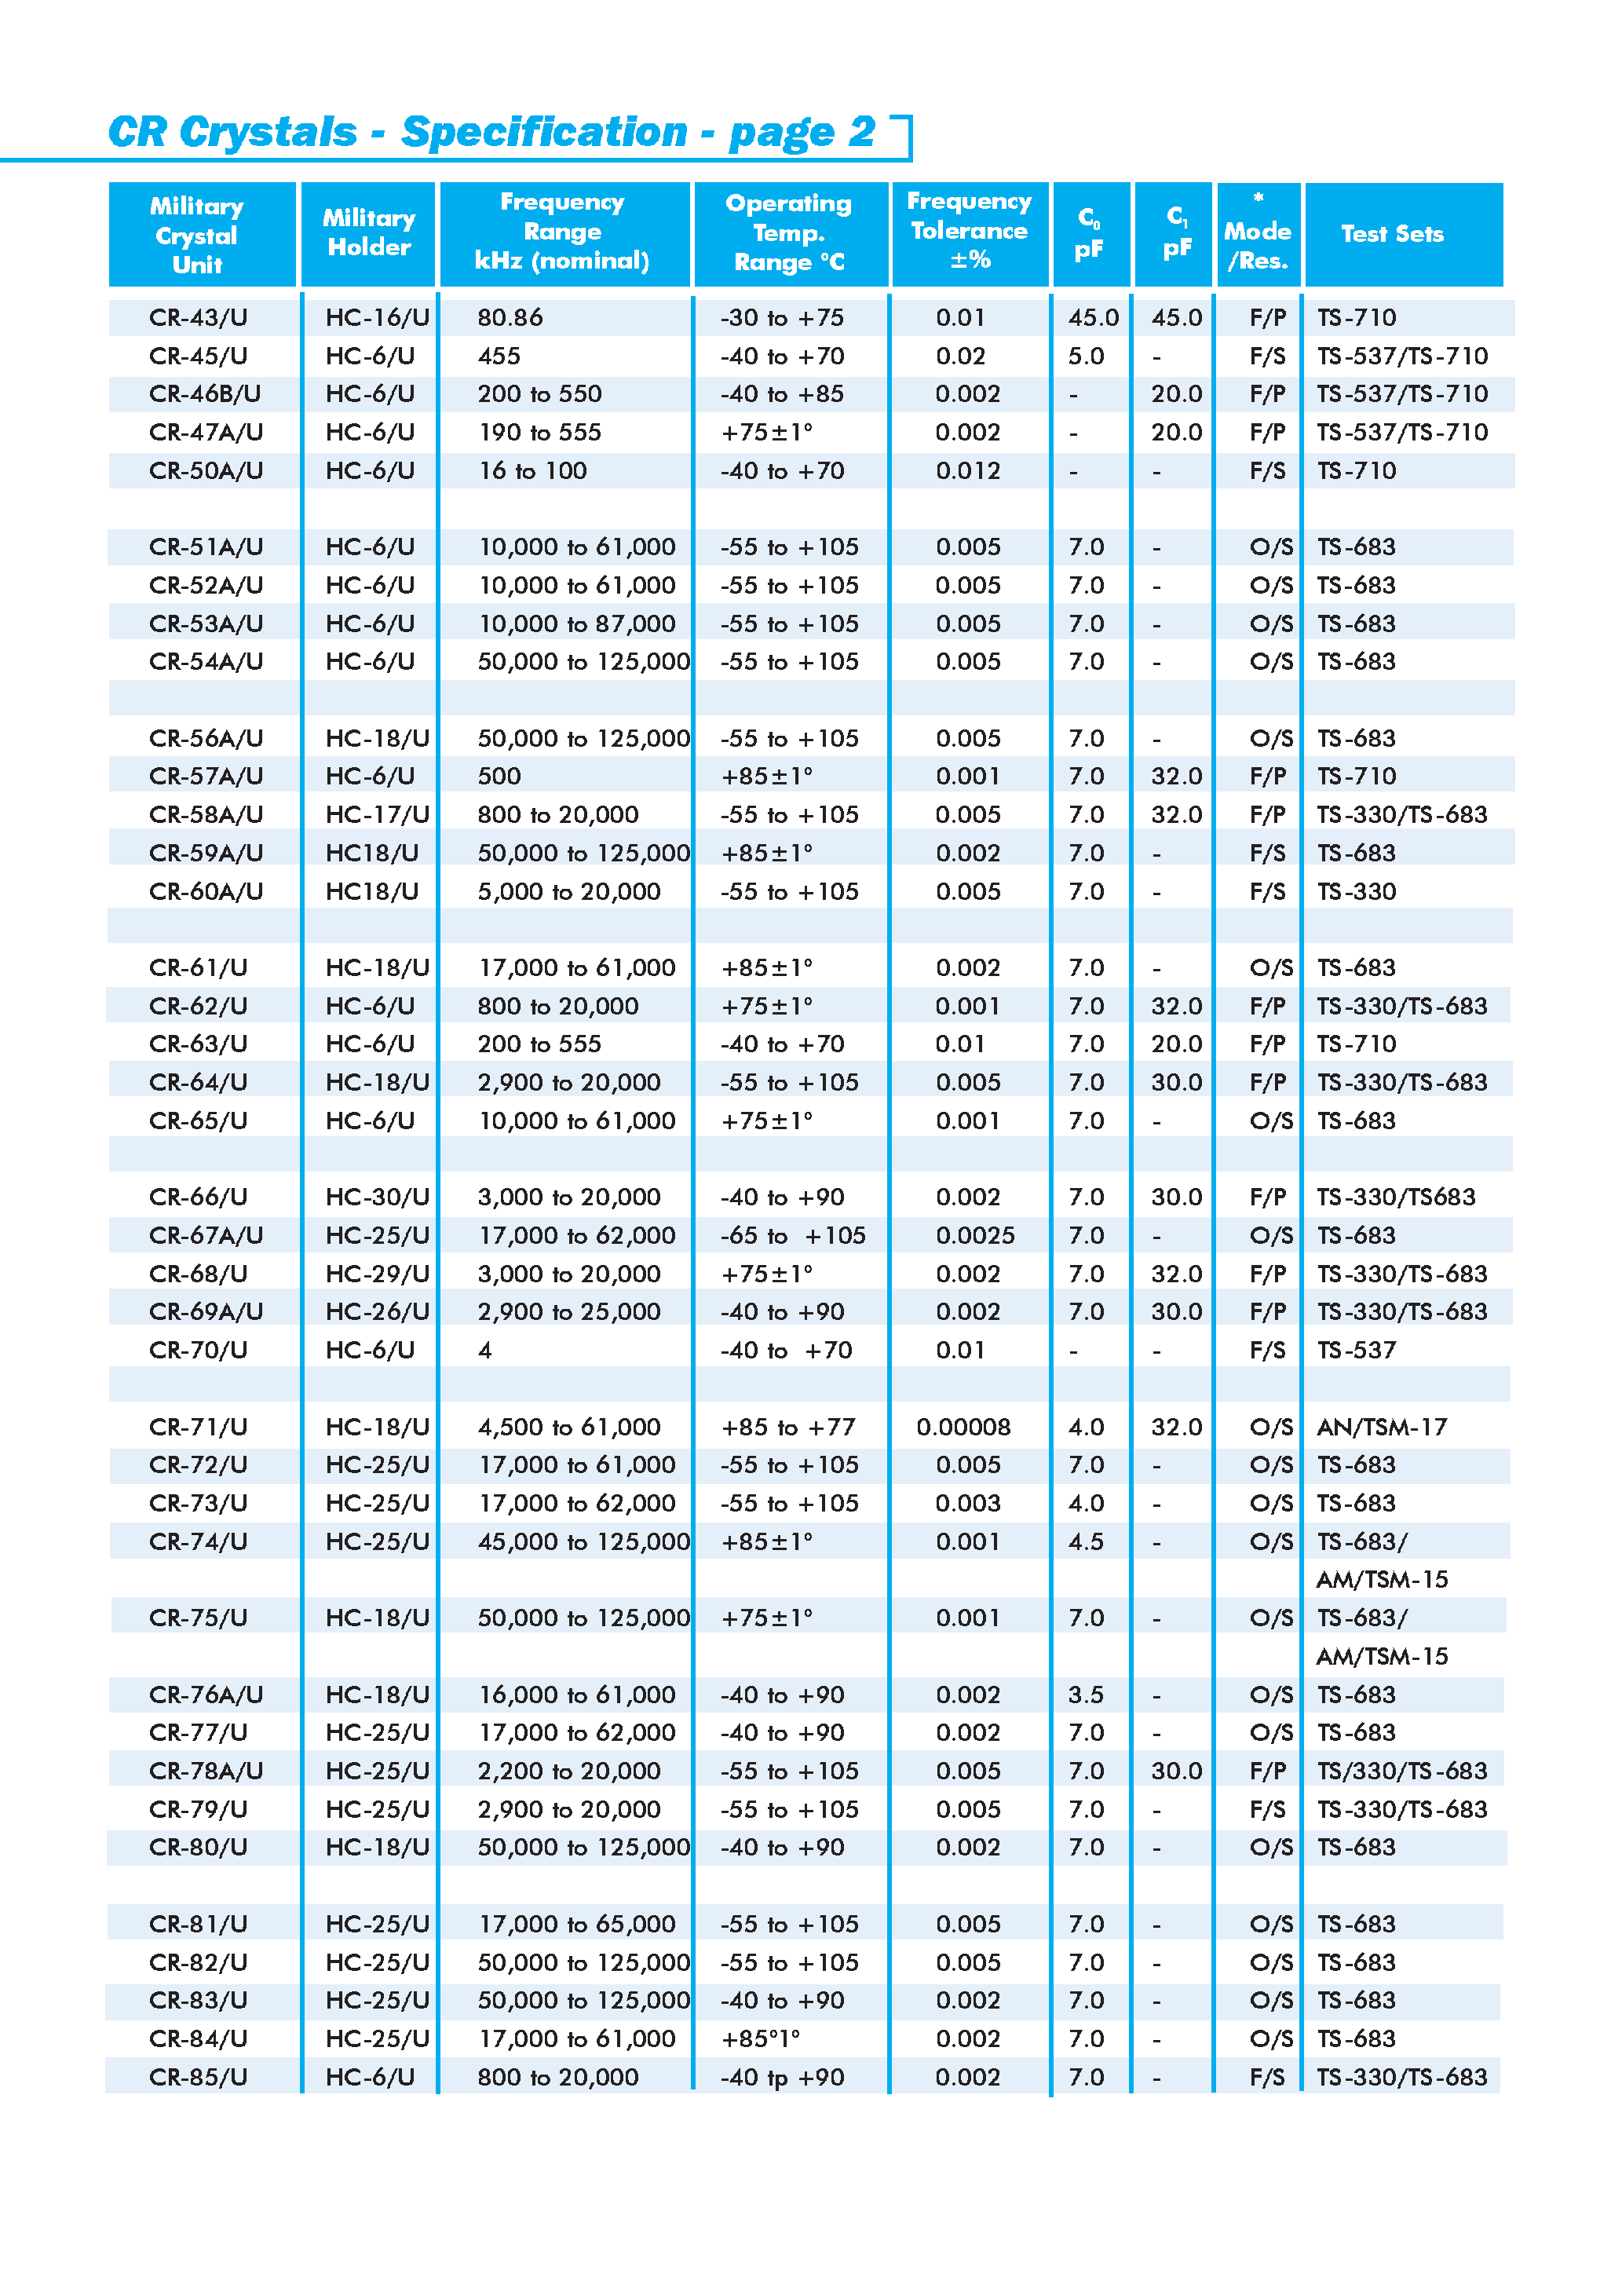 Datasheet CR-102/U - COMMERCIAL EQUIVALENTS TO MIL/CR CRYSTALS page 2